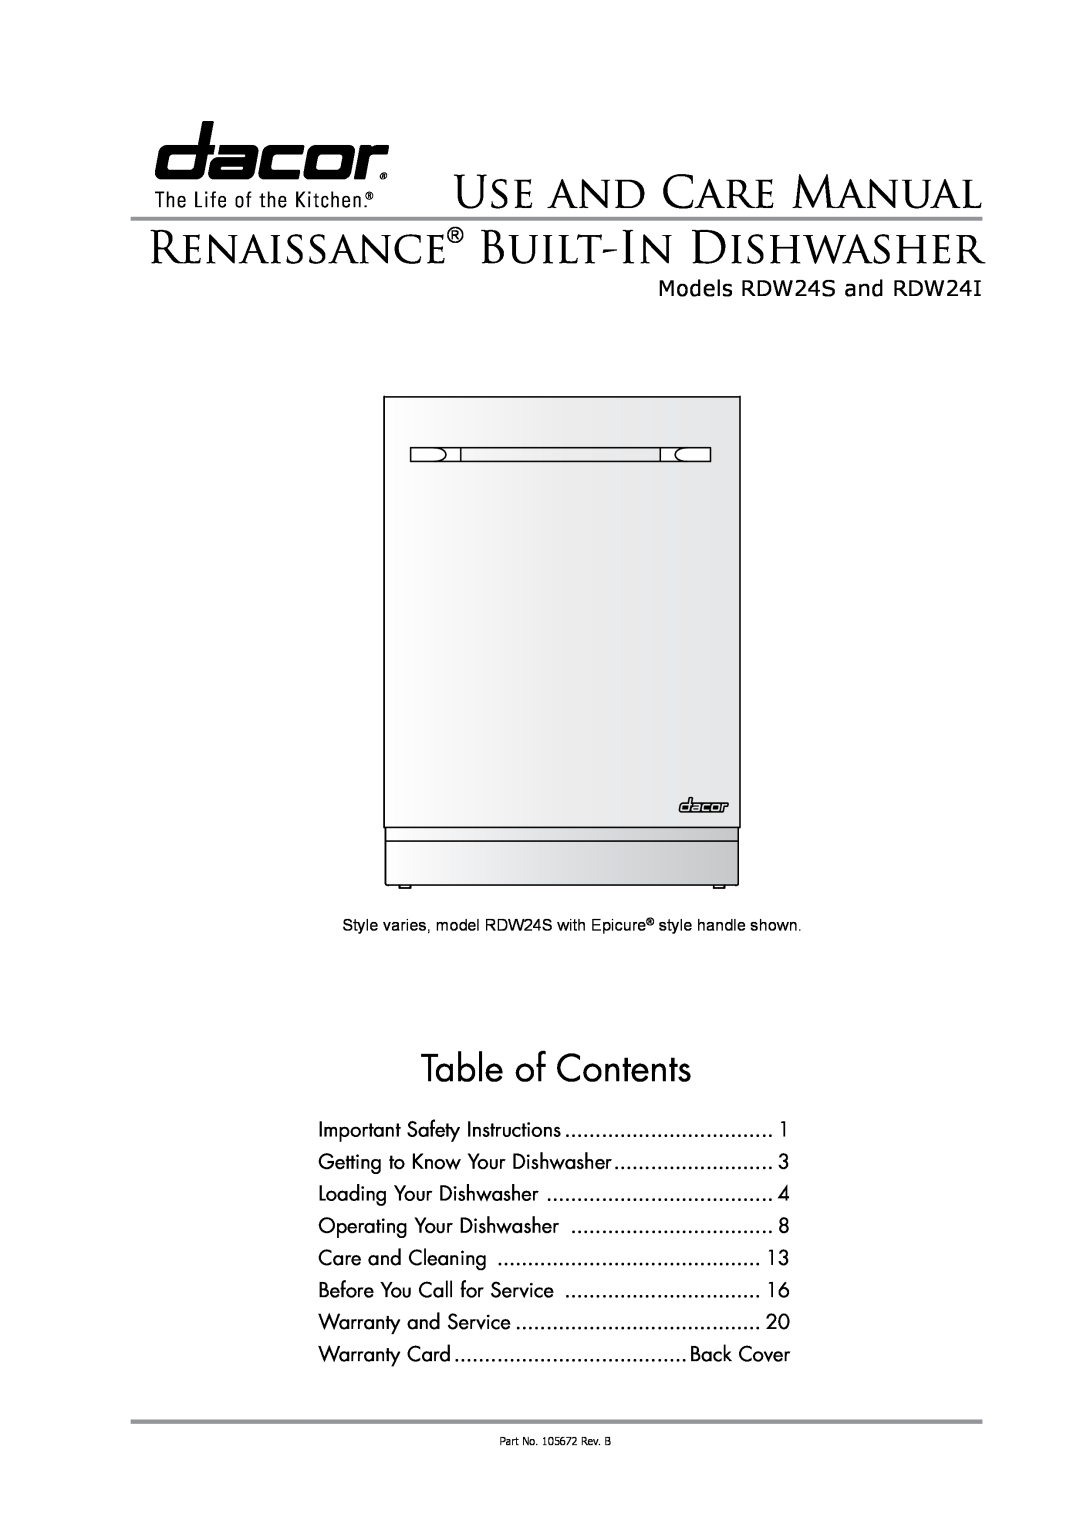 Dacor renaissance built-in dishwasher manual Use And Care Manual Renaissance Built-In Dishwasher, Table of Contents 